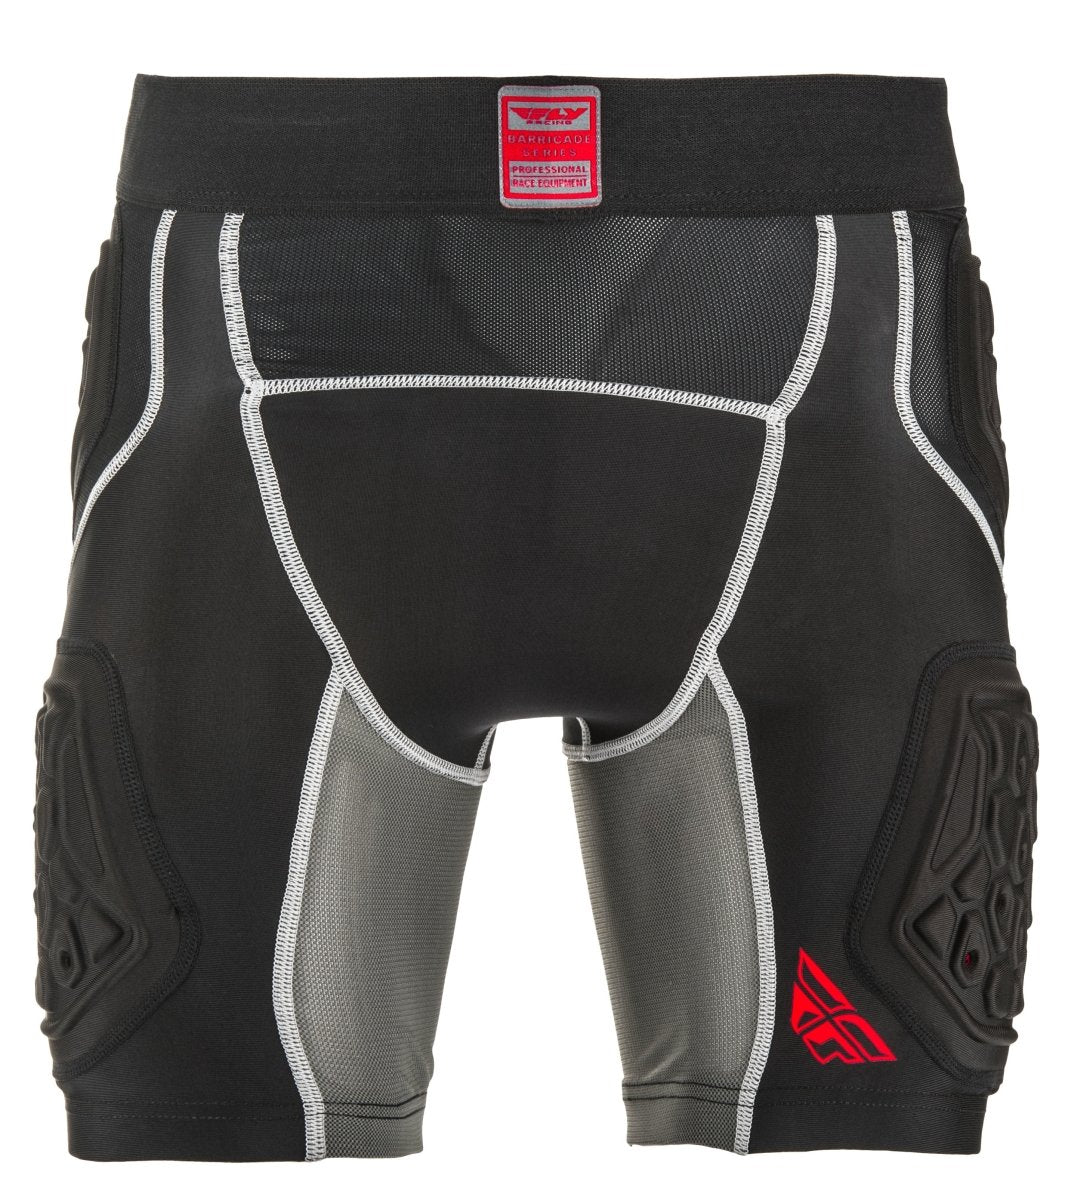 FLY RACING - BARRICADE COMPRESSION SHORTS - 360-9755L - 191361083518